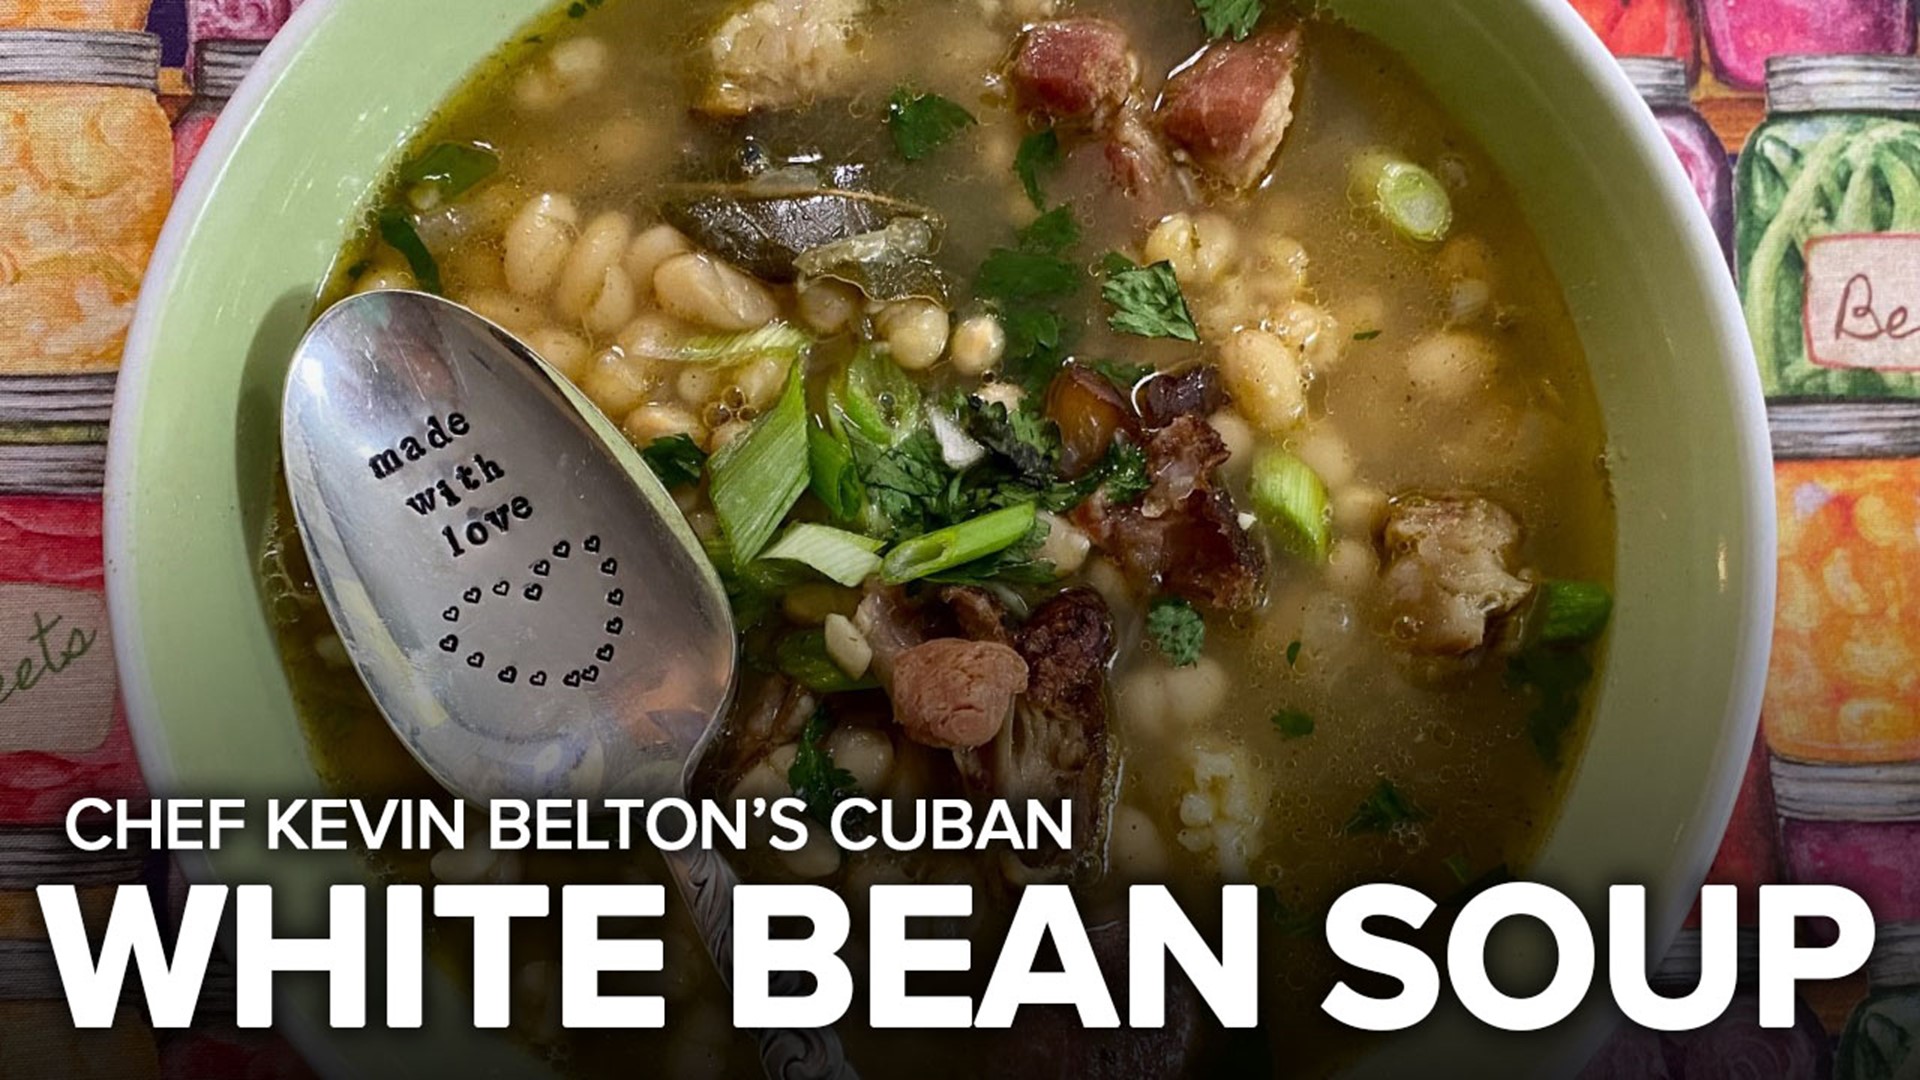 Feel that chill in the air? When it gets cold, I like to warm up with some Cuban white bean soup!